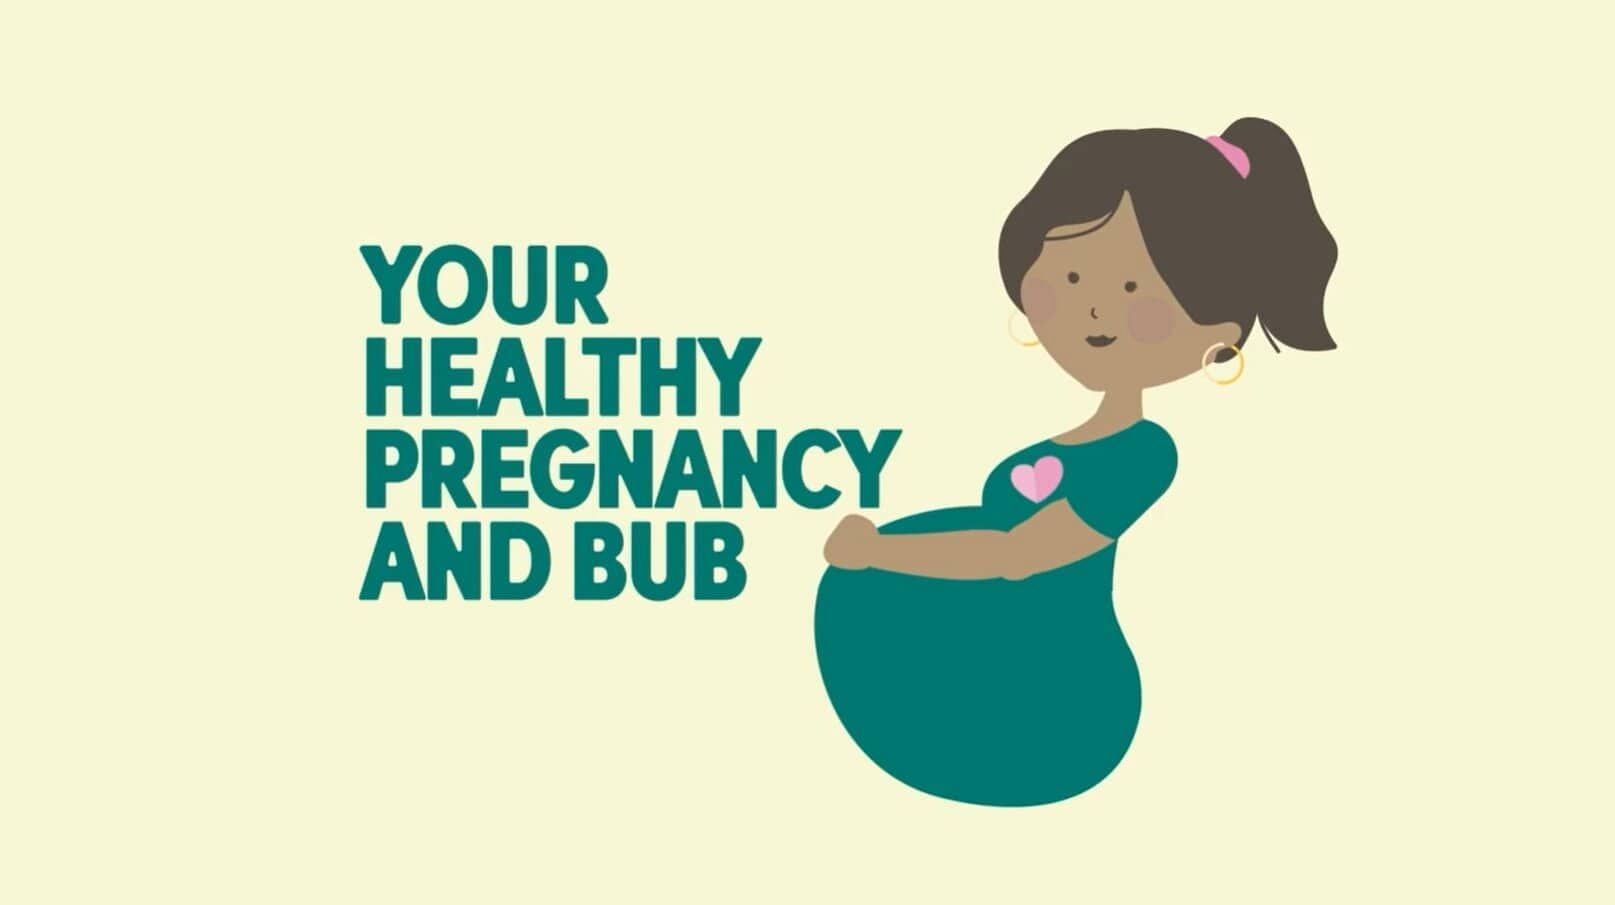 7 Tips for a Healthy Pregnancy and a Healthy Baby